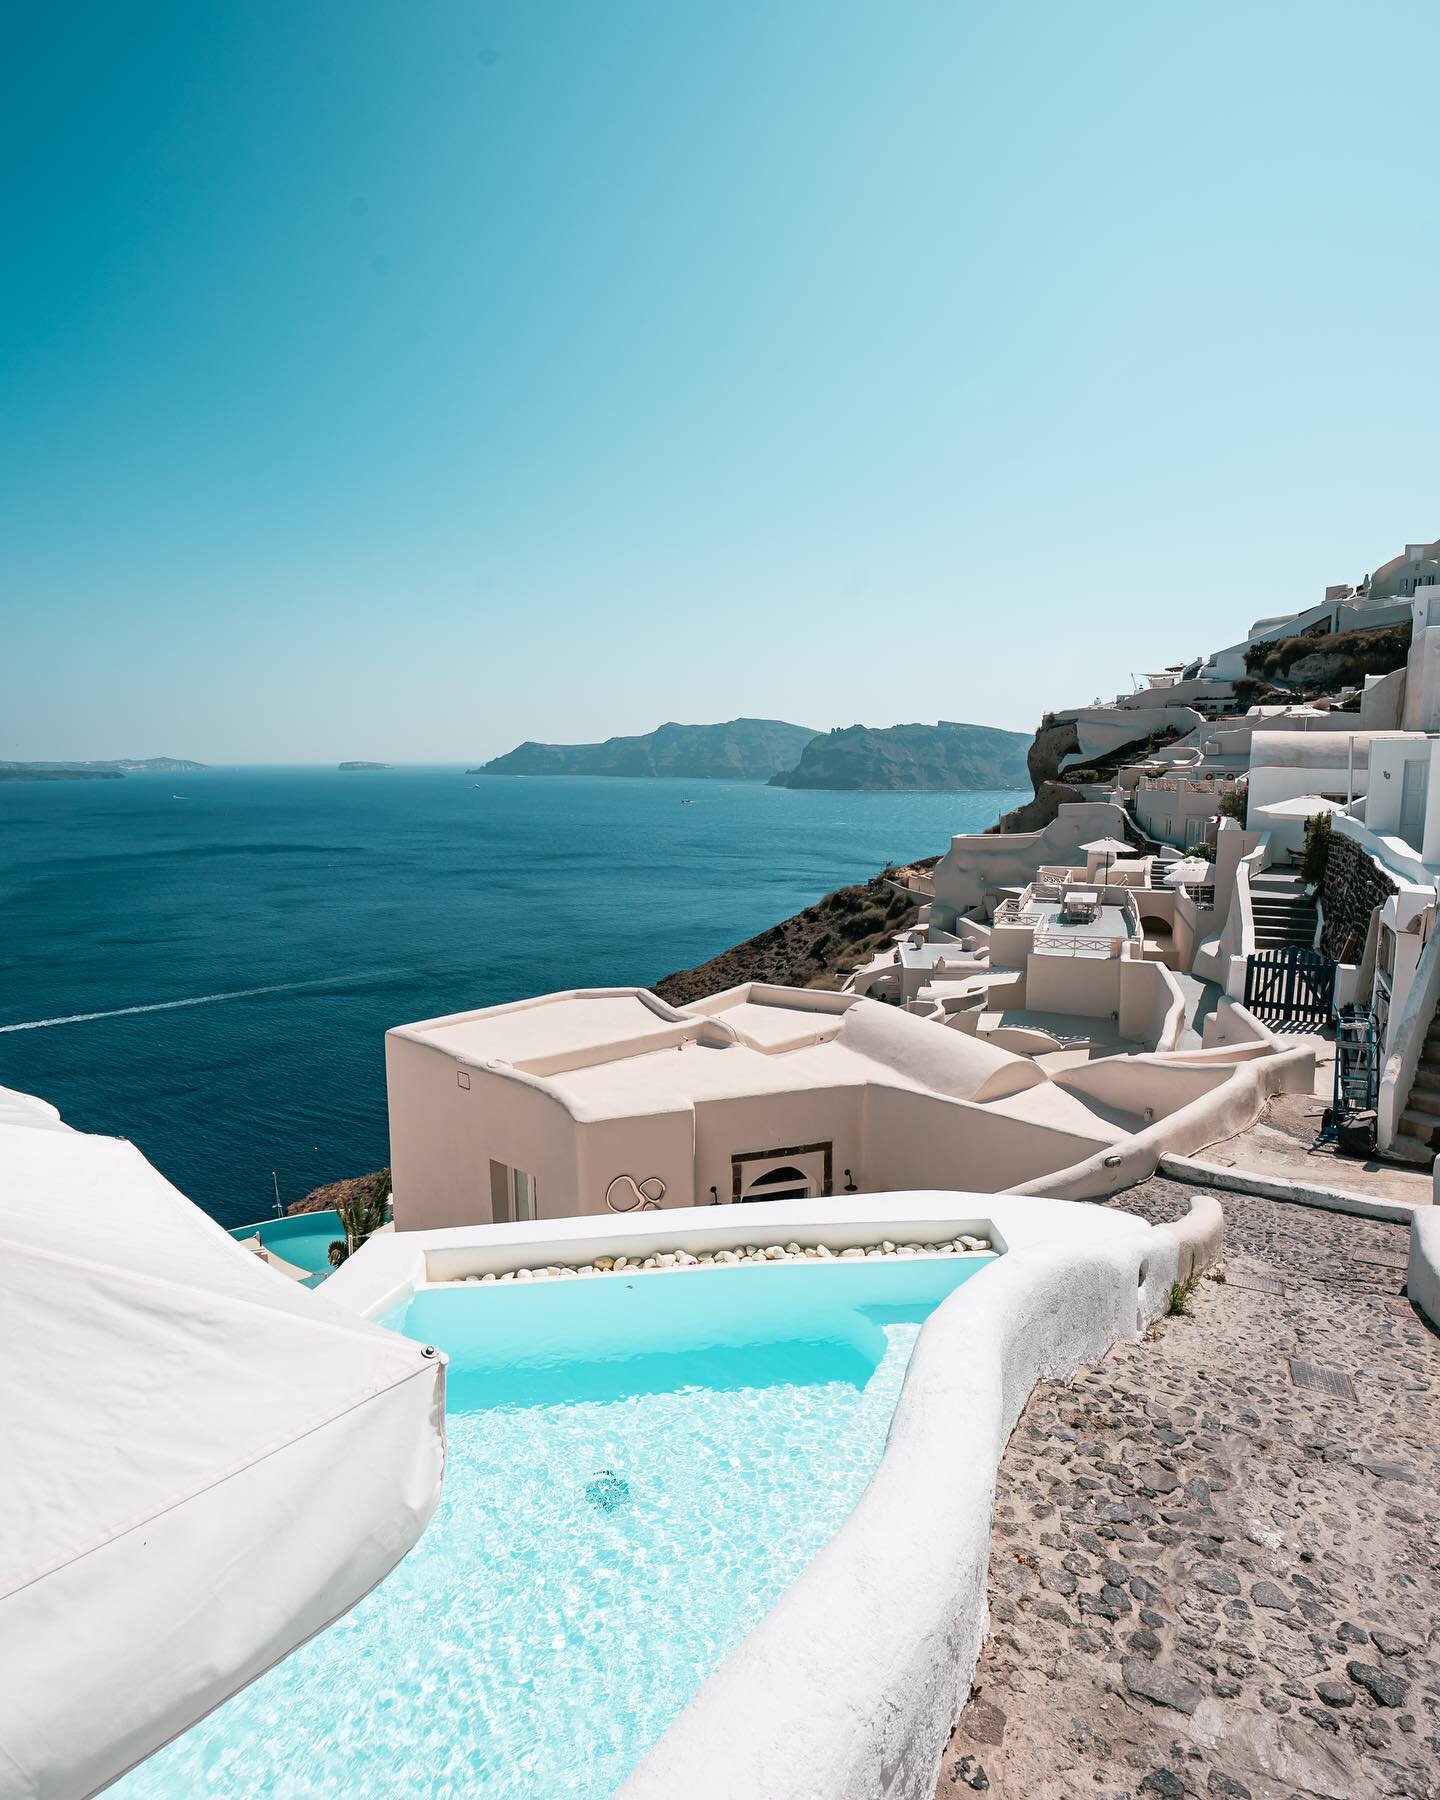 My least favorite Instagram caption: &ldquo;would you stay here&rdquo; next to a photo of a luxury hotel&hellip; 🤨

Let&rsquo;s do better. 

Ok but which one is your favorite? 🤩

1️⃣2️⃣3️⃣ or 4️⃣??
Vote below!

::

The dreamy Greece hotel pools fro